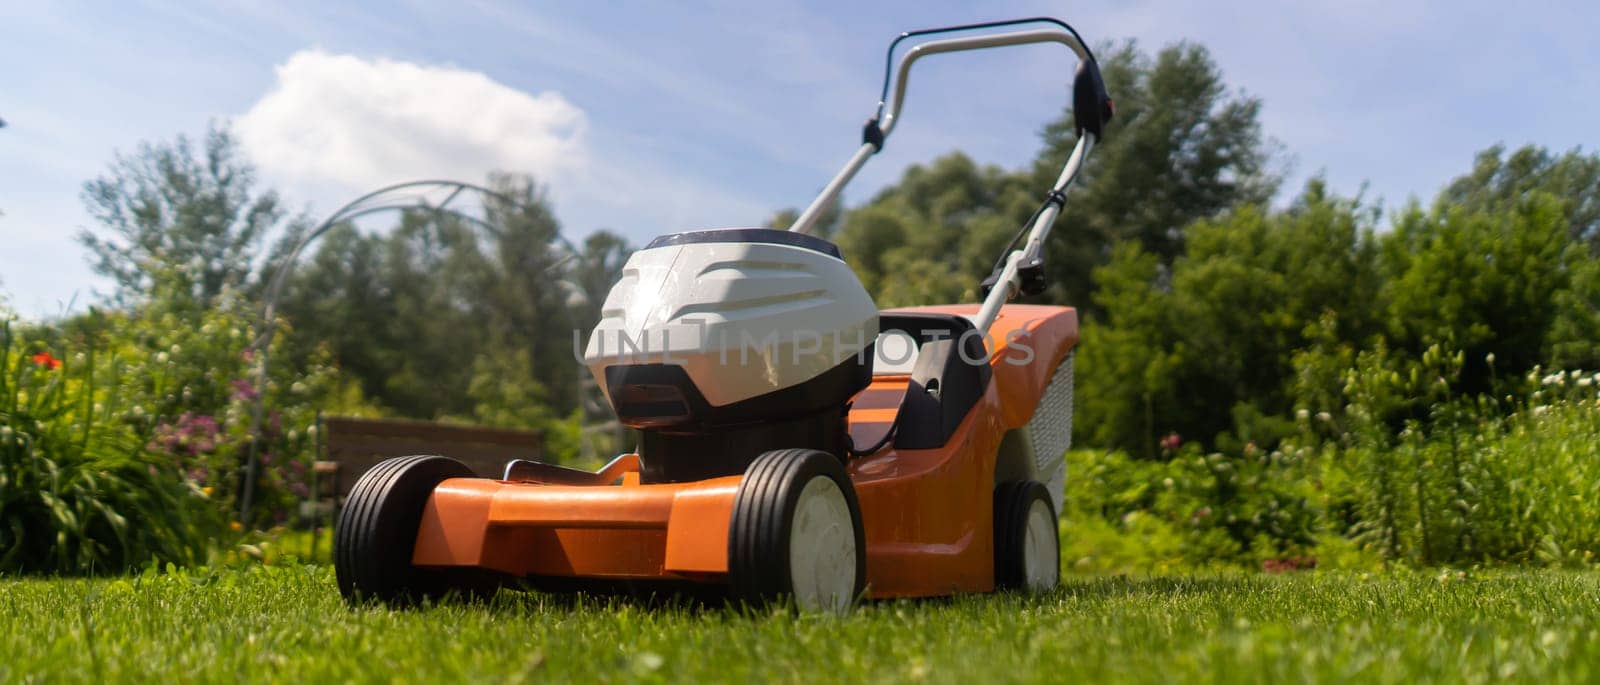 A lawnmower at the meadow, in the backyard lawn. by africapink